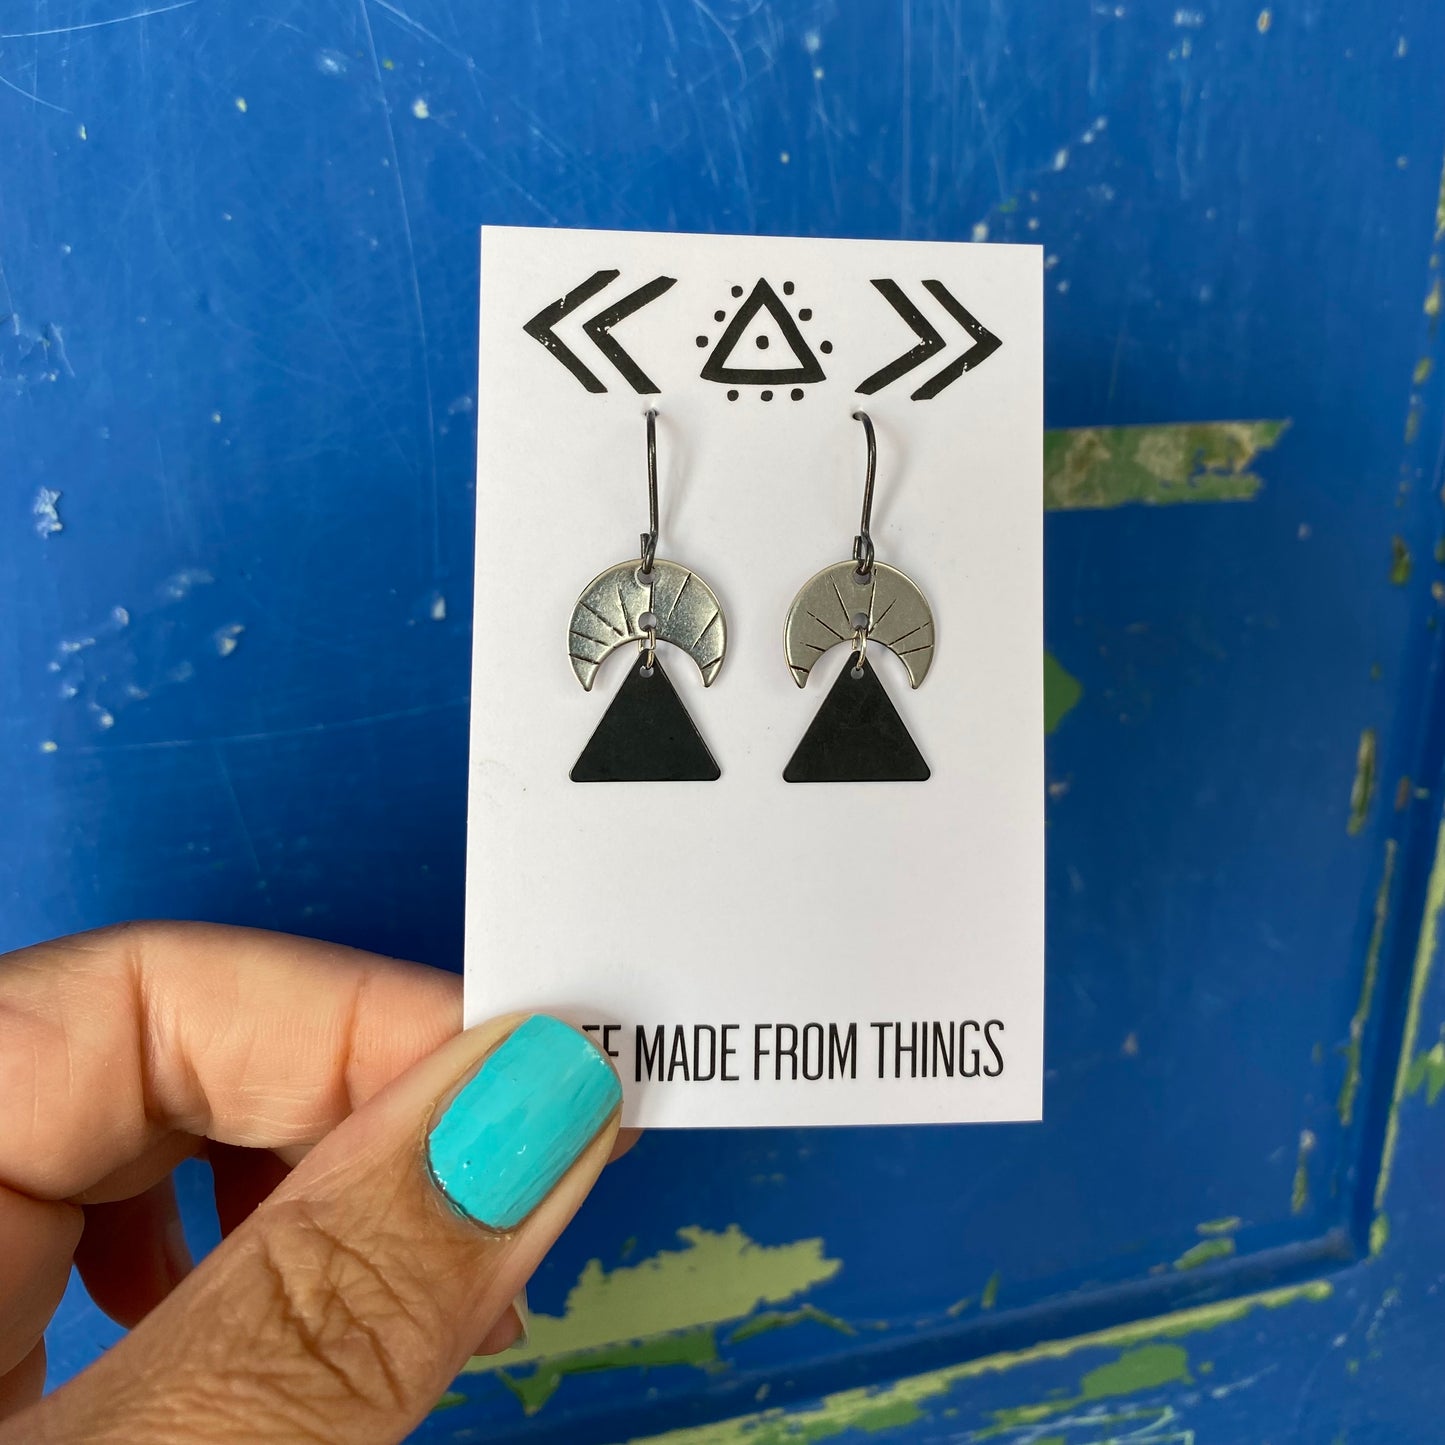 MOON RISE Silver Tone and Black Triangle Earrings